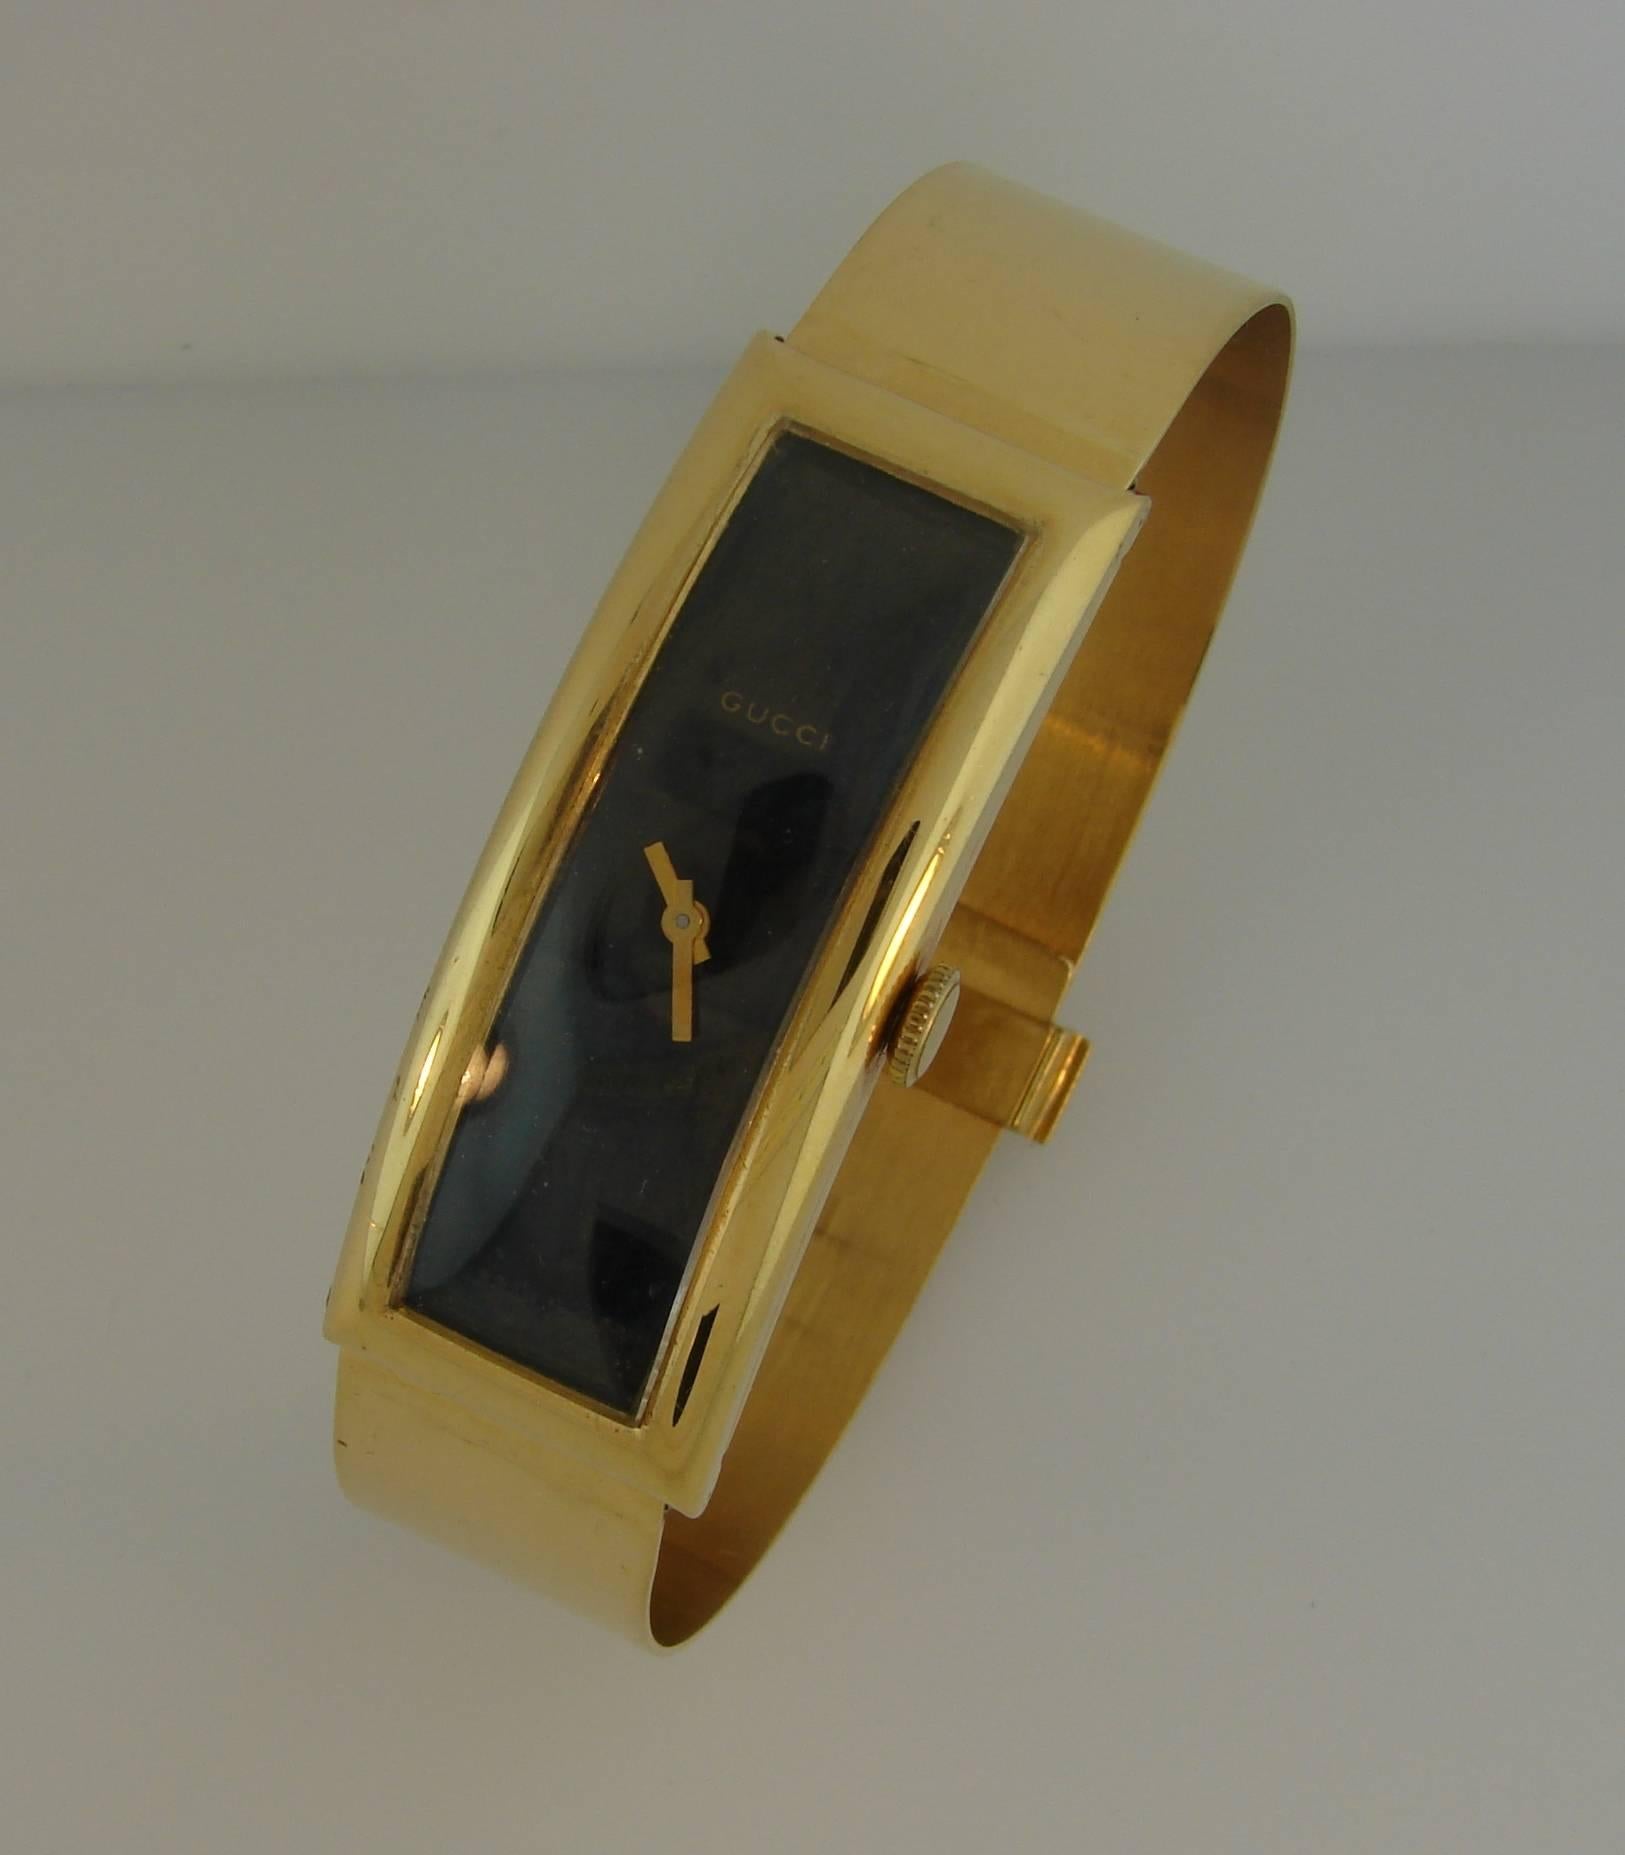 Stylish and elegant gold watch that is a great addition to your collection. It was created by Gucci in the 1970s. 
The watch and the bracelet are made of 18 karat yellow gold. 
The movement is mechanical, manual wind.
The face measures 2 x 3/4 inch